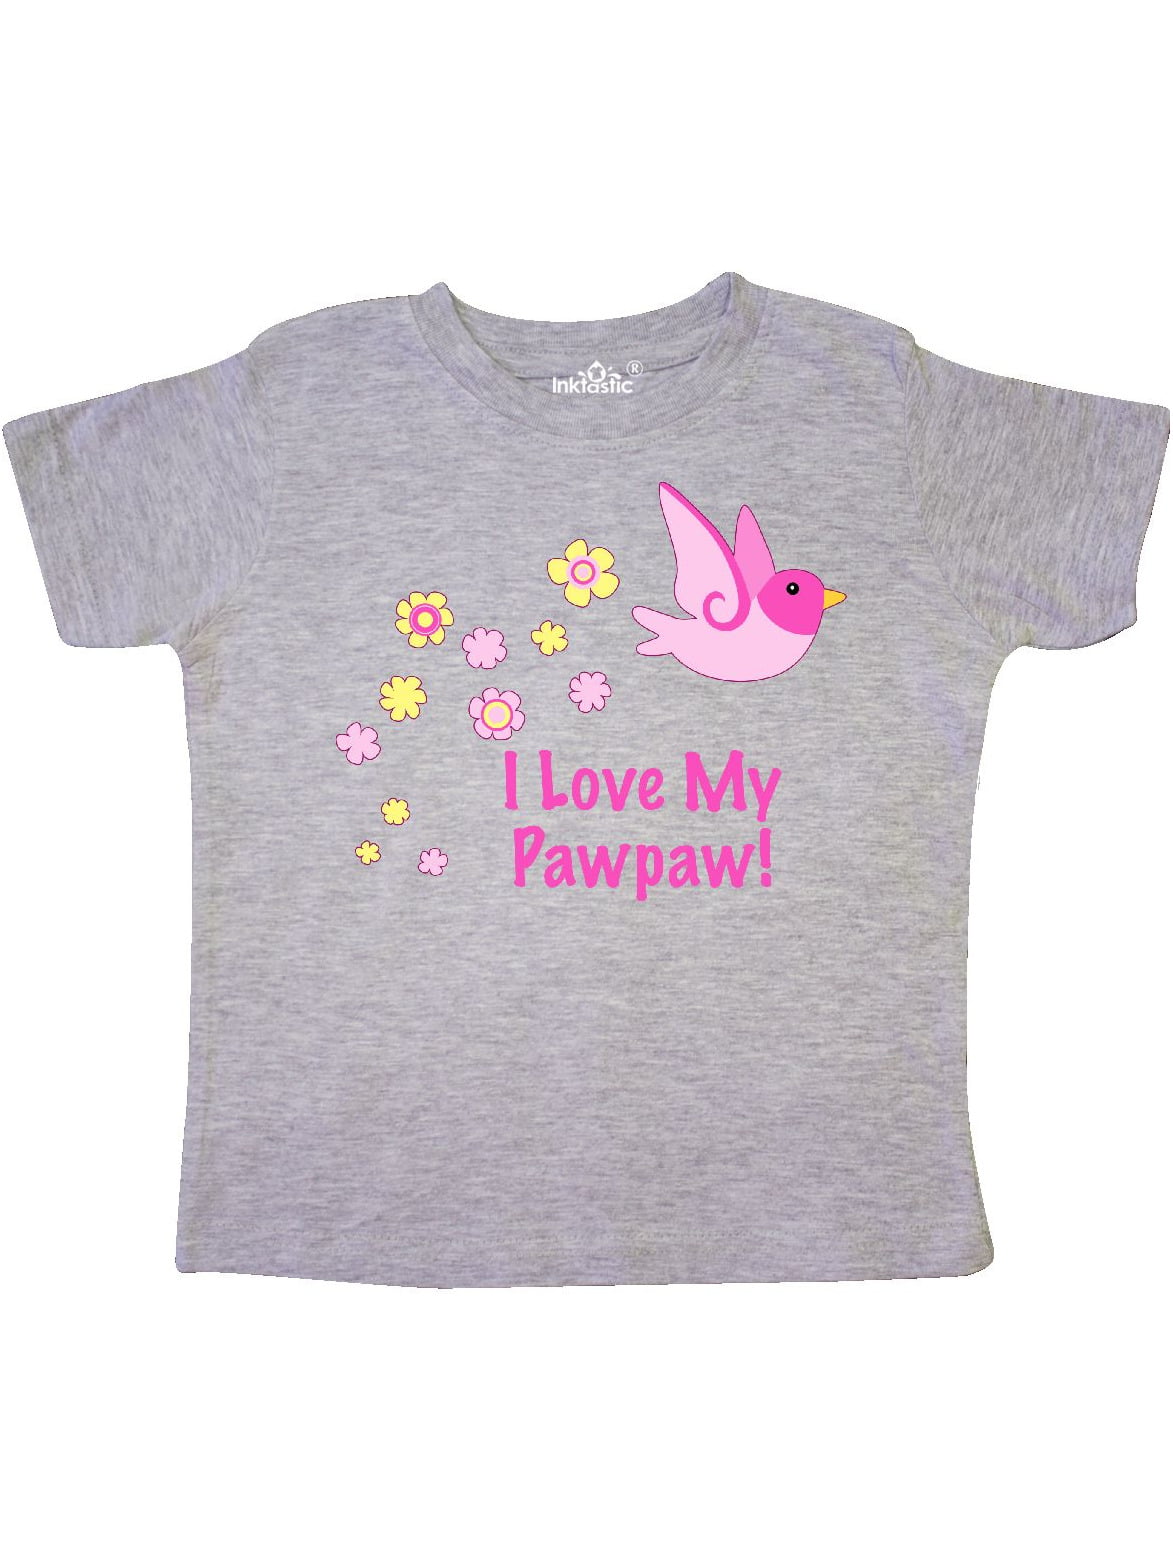 Toddler/Kids Ruffle T-Shirt One Day Ill Play Rugby Just Like My Pawpaw